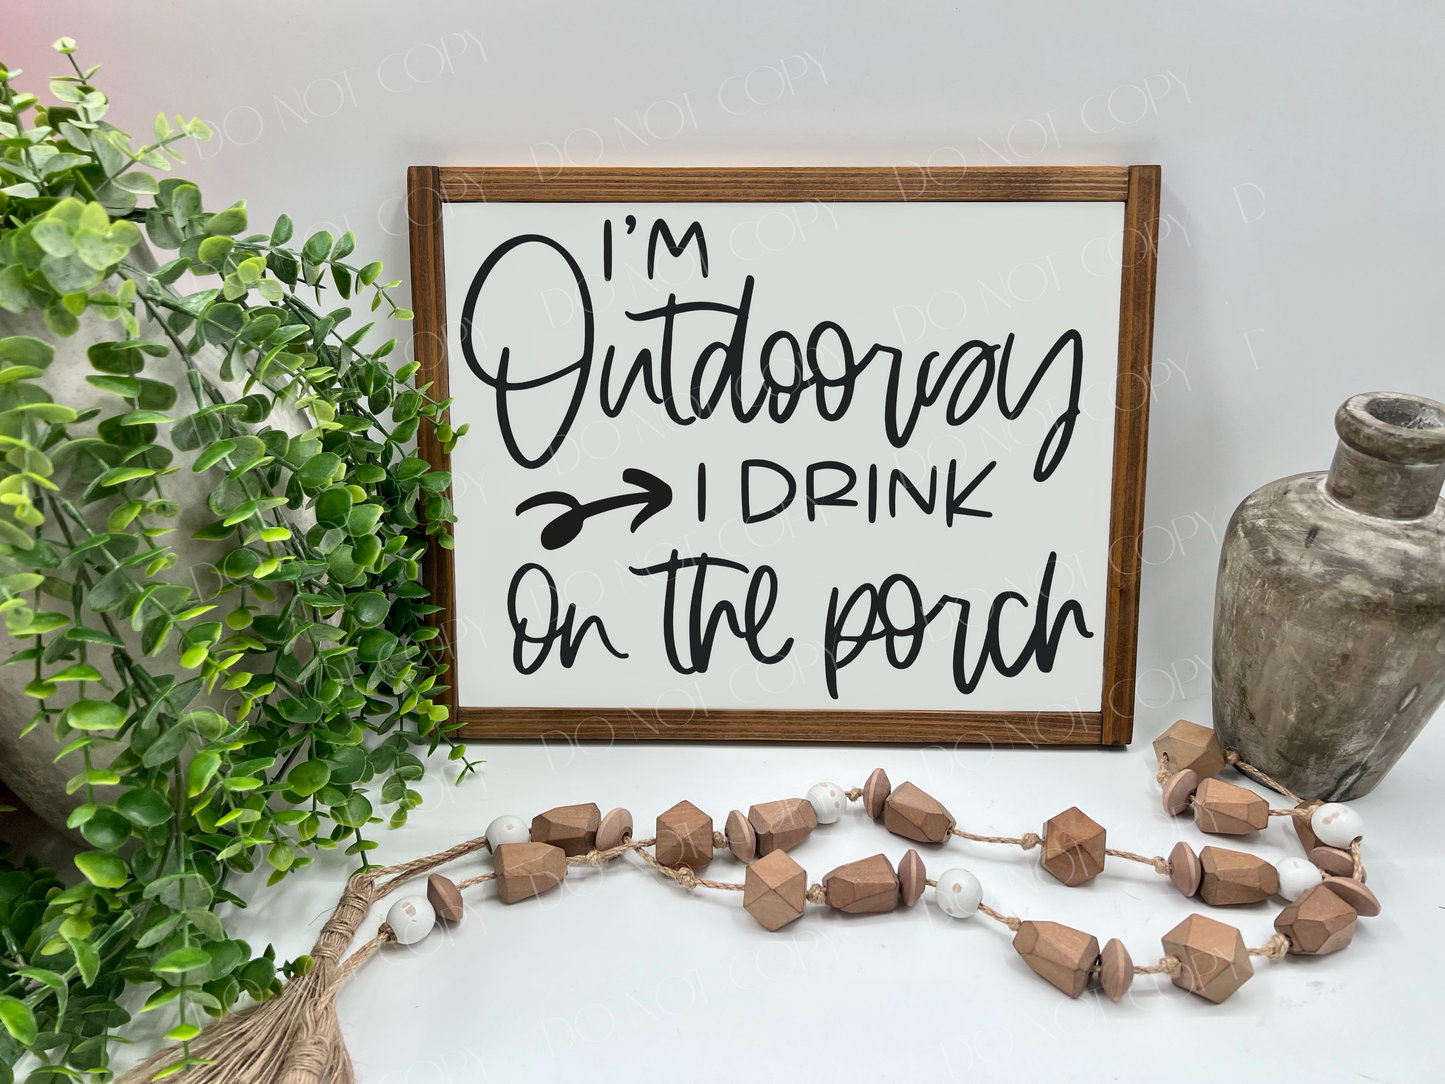 I’m Outdoorsy I Drink On The Porch - White/Thick/Kona - Wood Sign